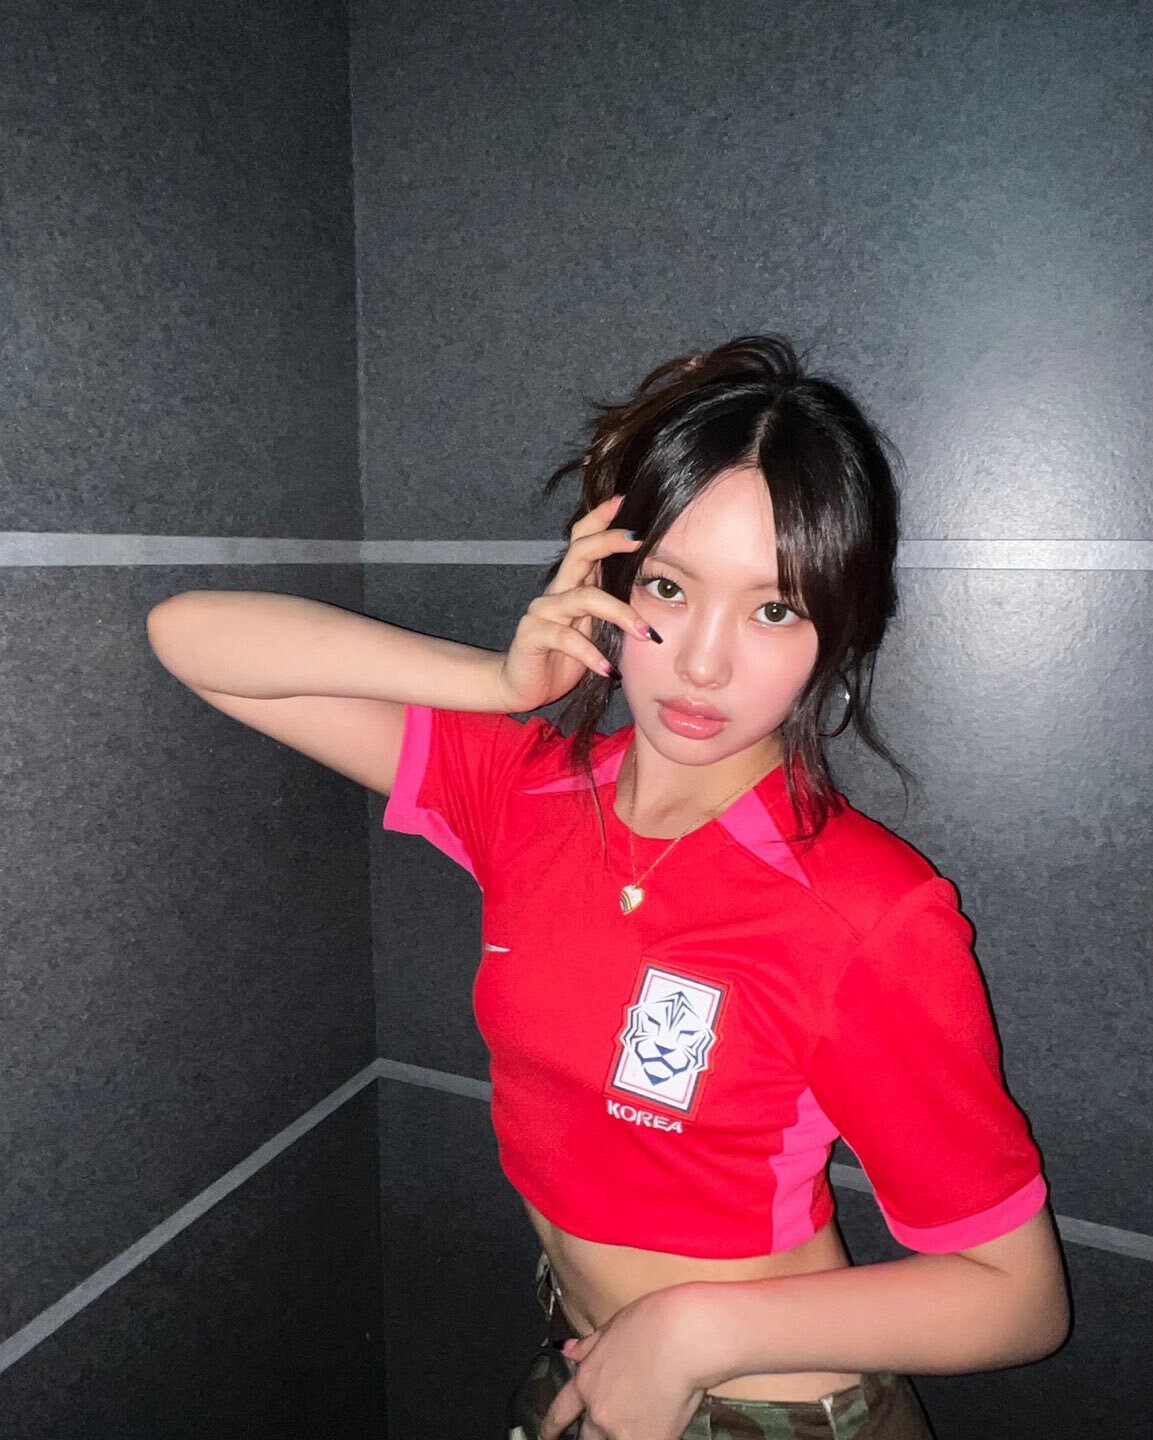 Hyein Is the 'Maknae' of NewJeans: Age, Debut Details, More